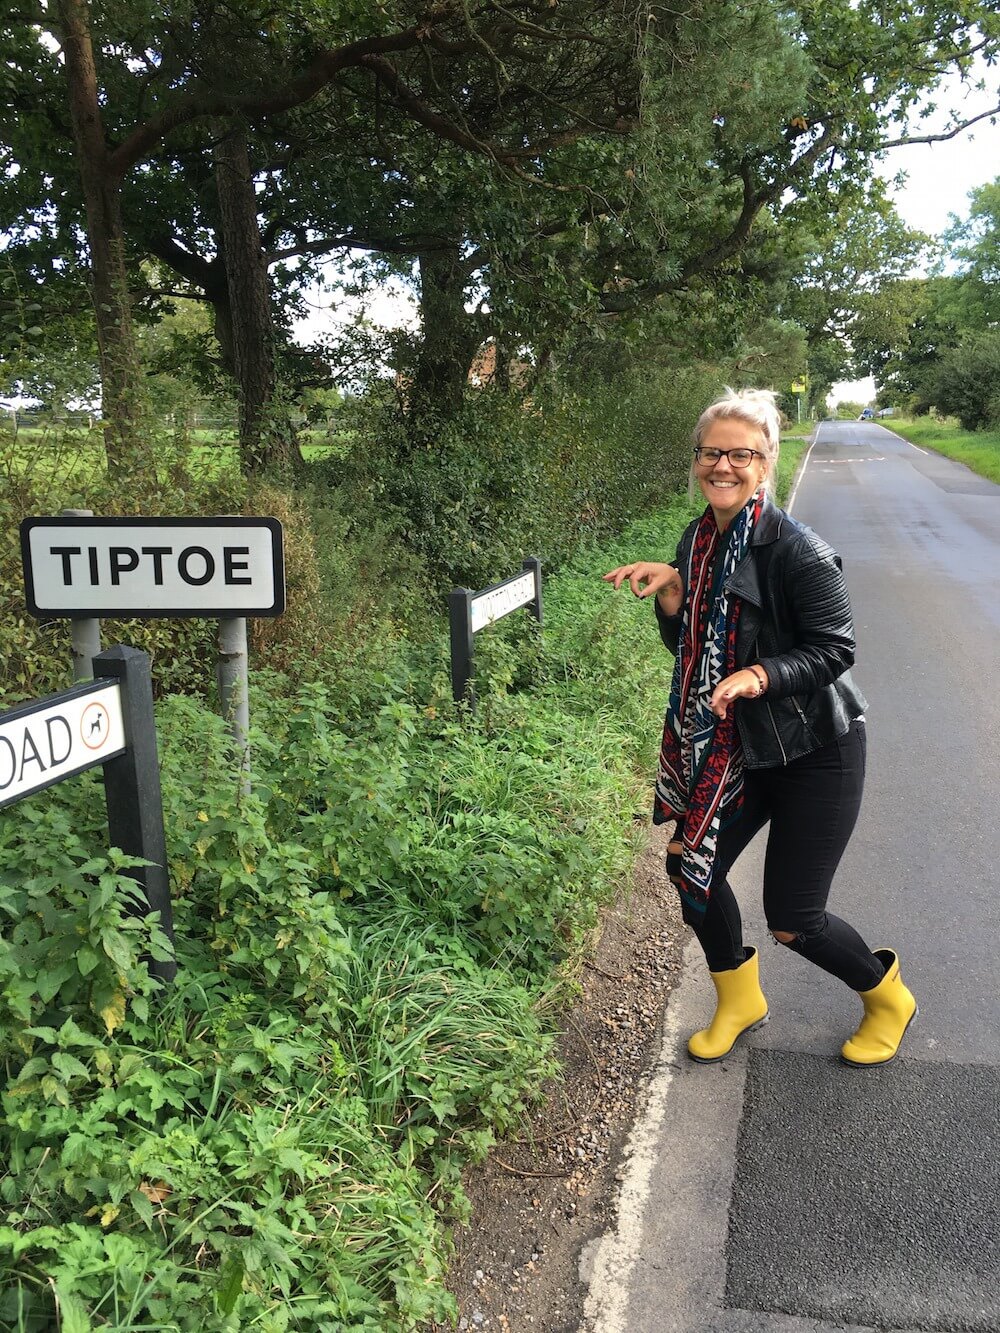 Exploring Tiptoe in the New Forest